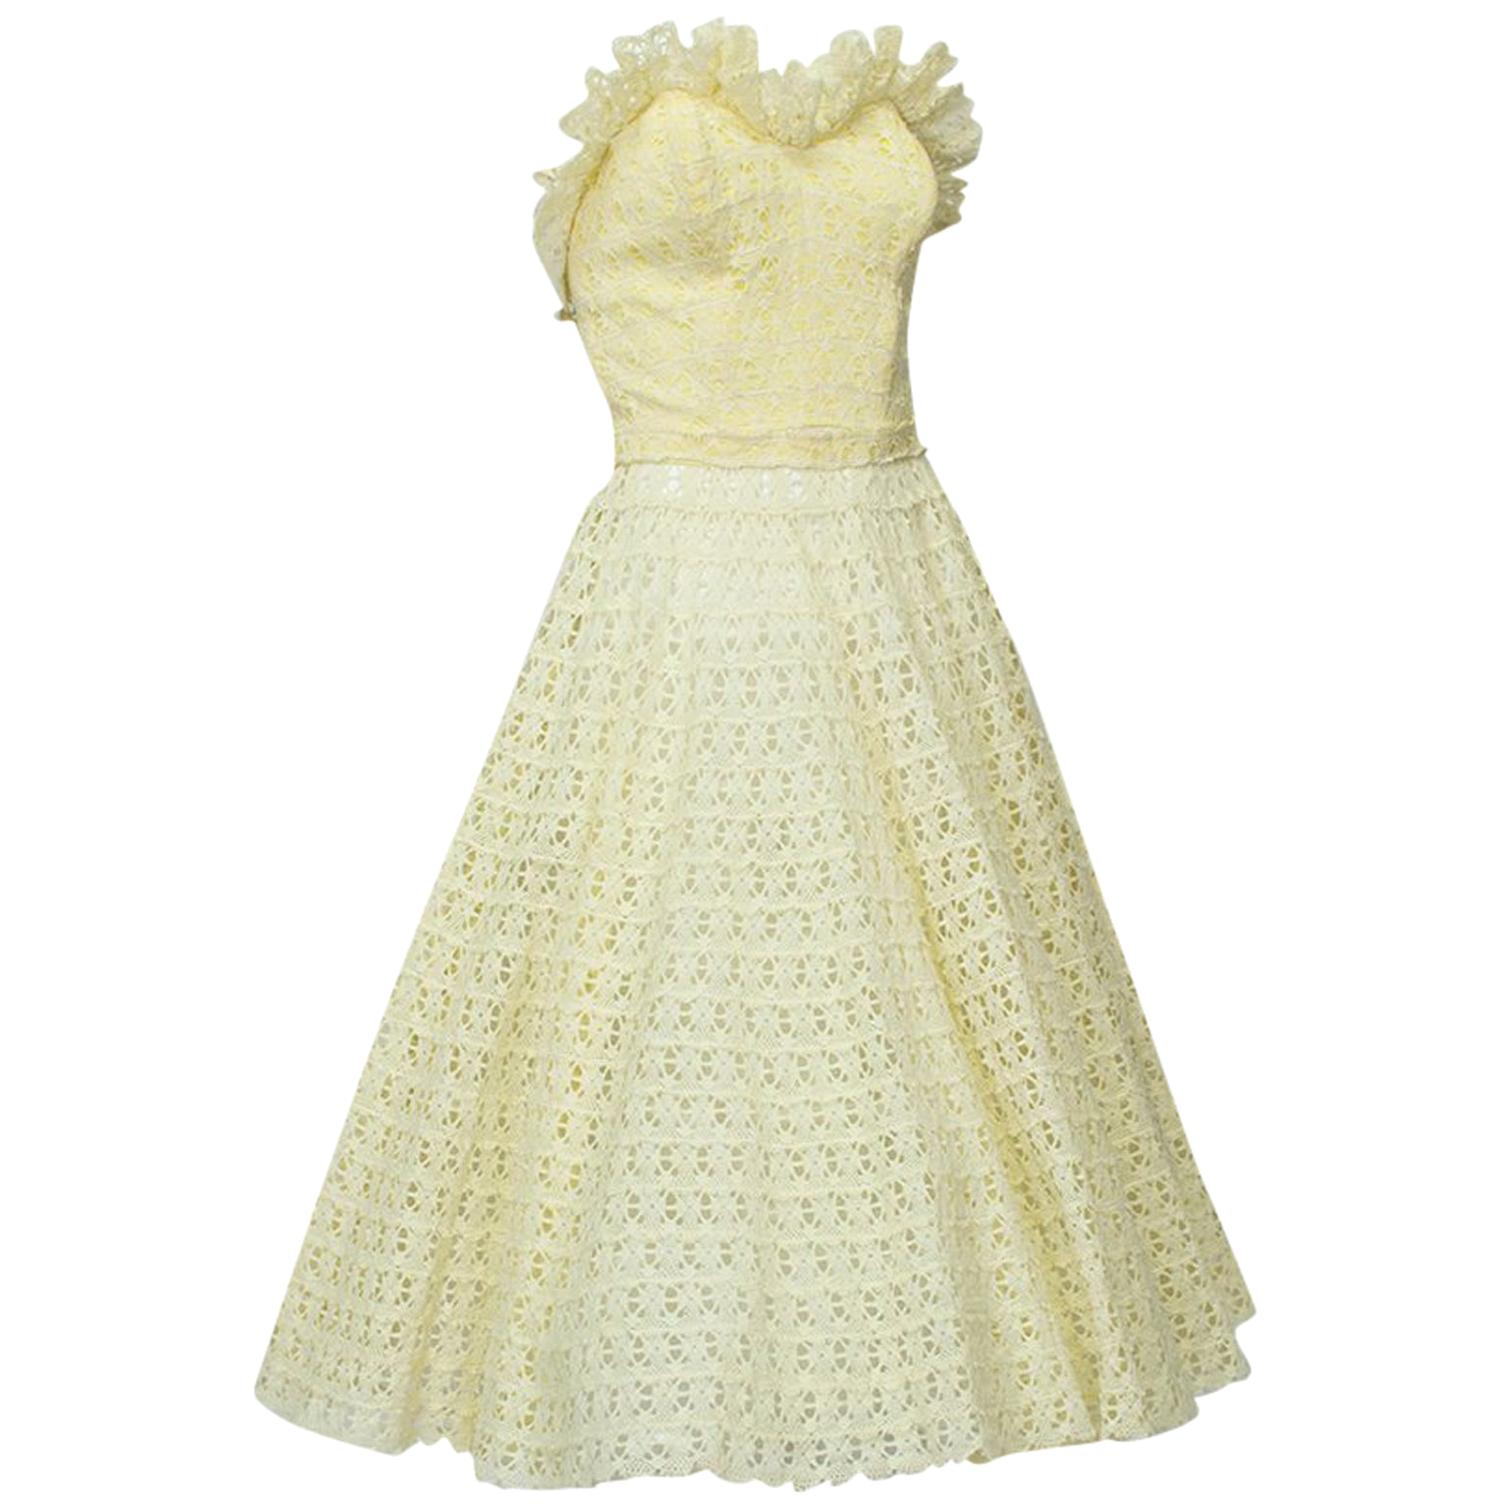 Yellow Crochet Sun Suit with Strapless Bustier and Circle Skirt - Med, 1950s